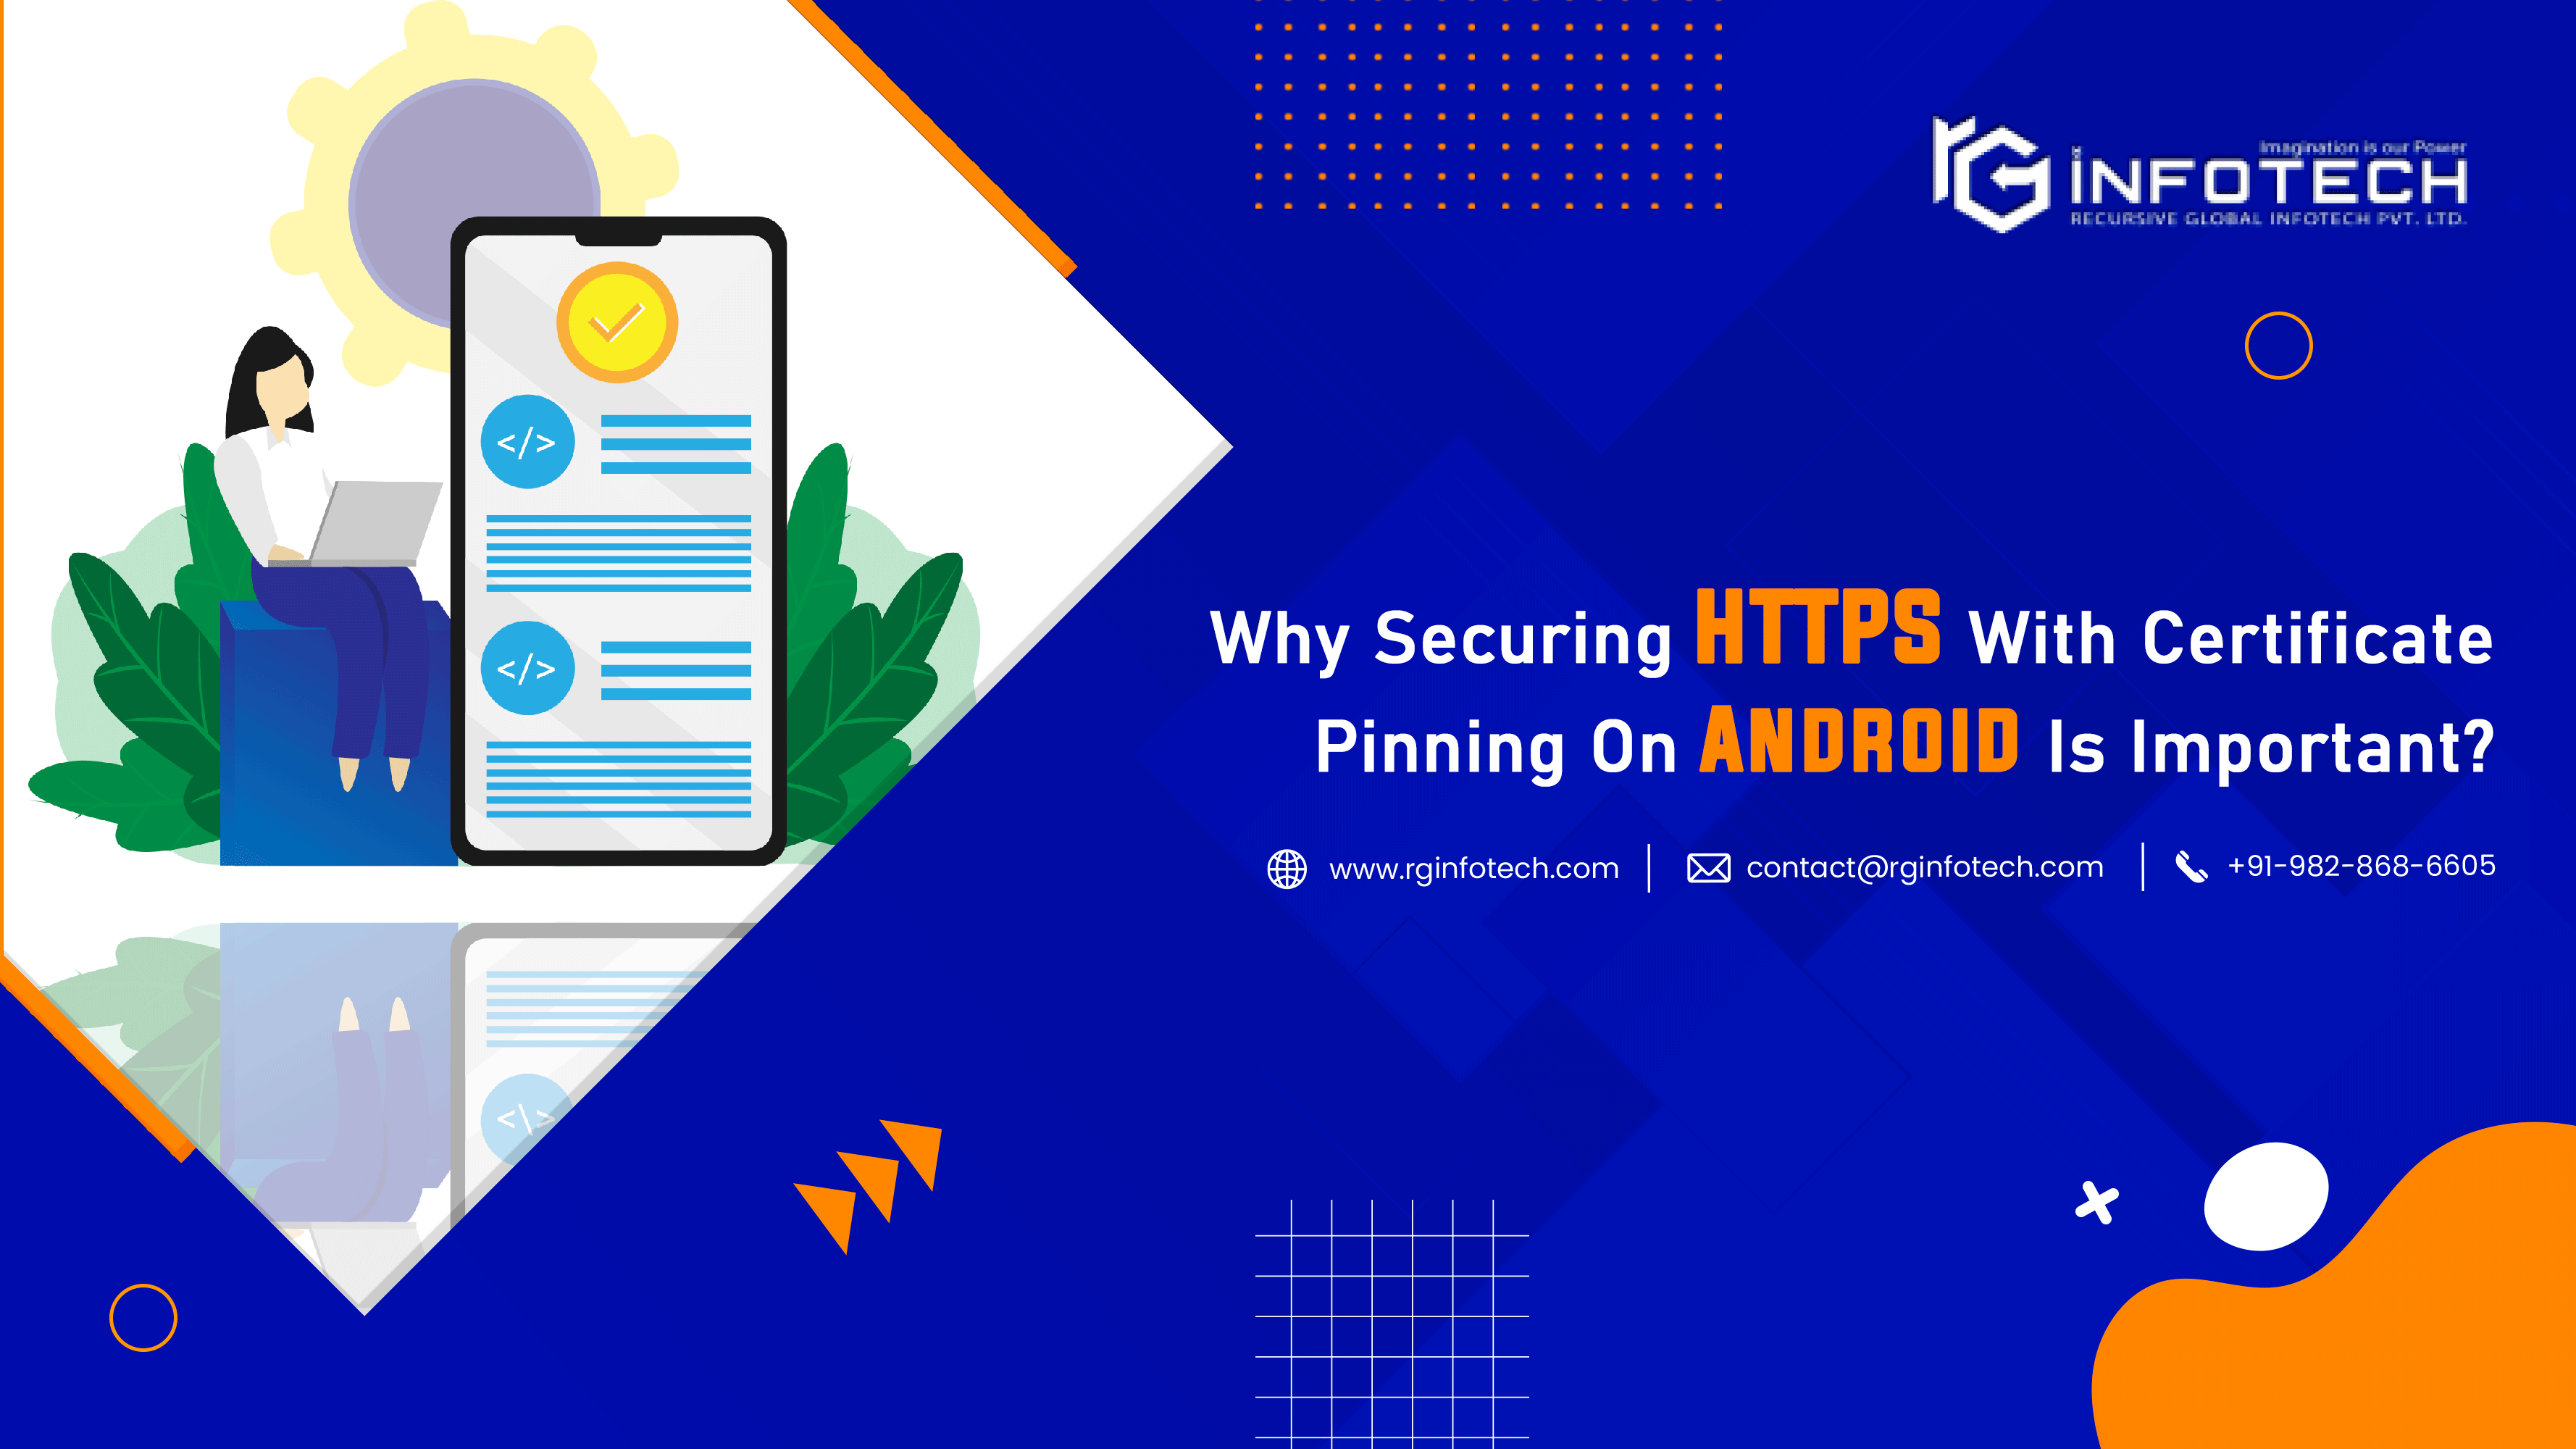 Why Securing HTTPS With Certificate Pinning On Android Is Important?